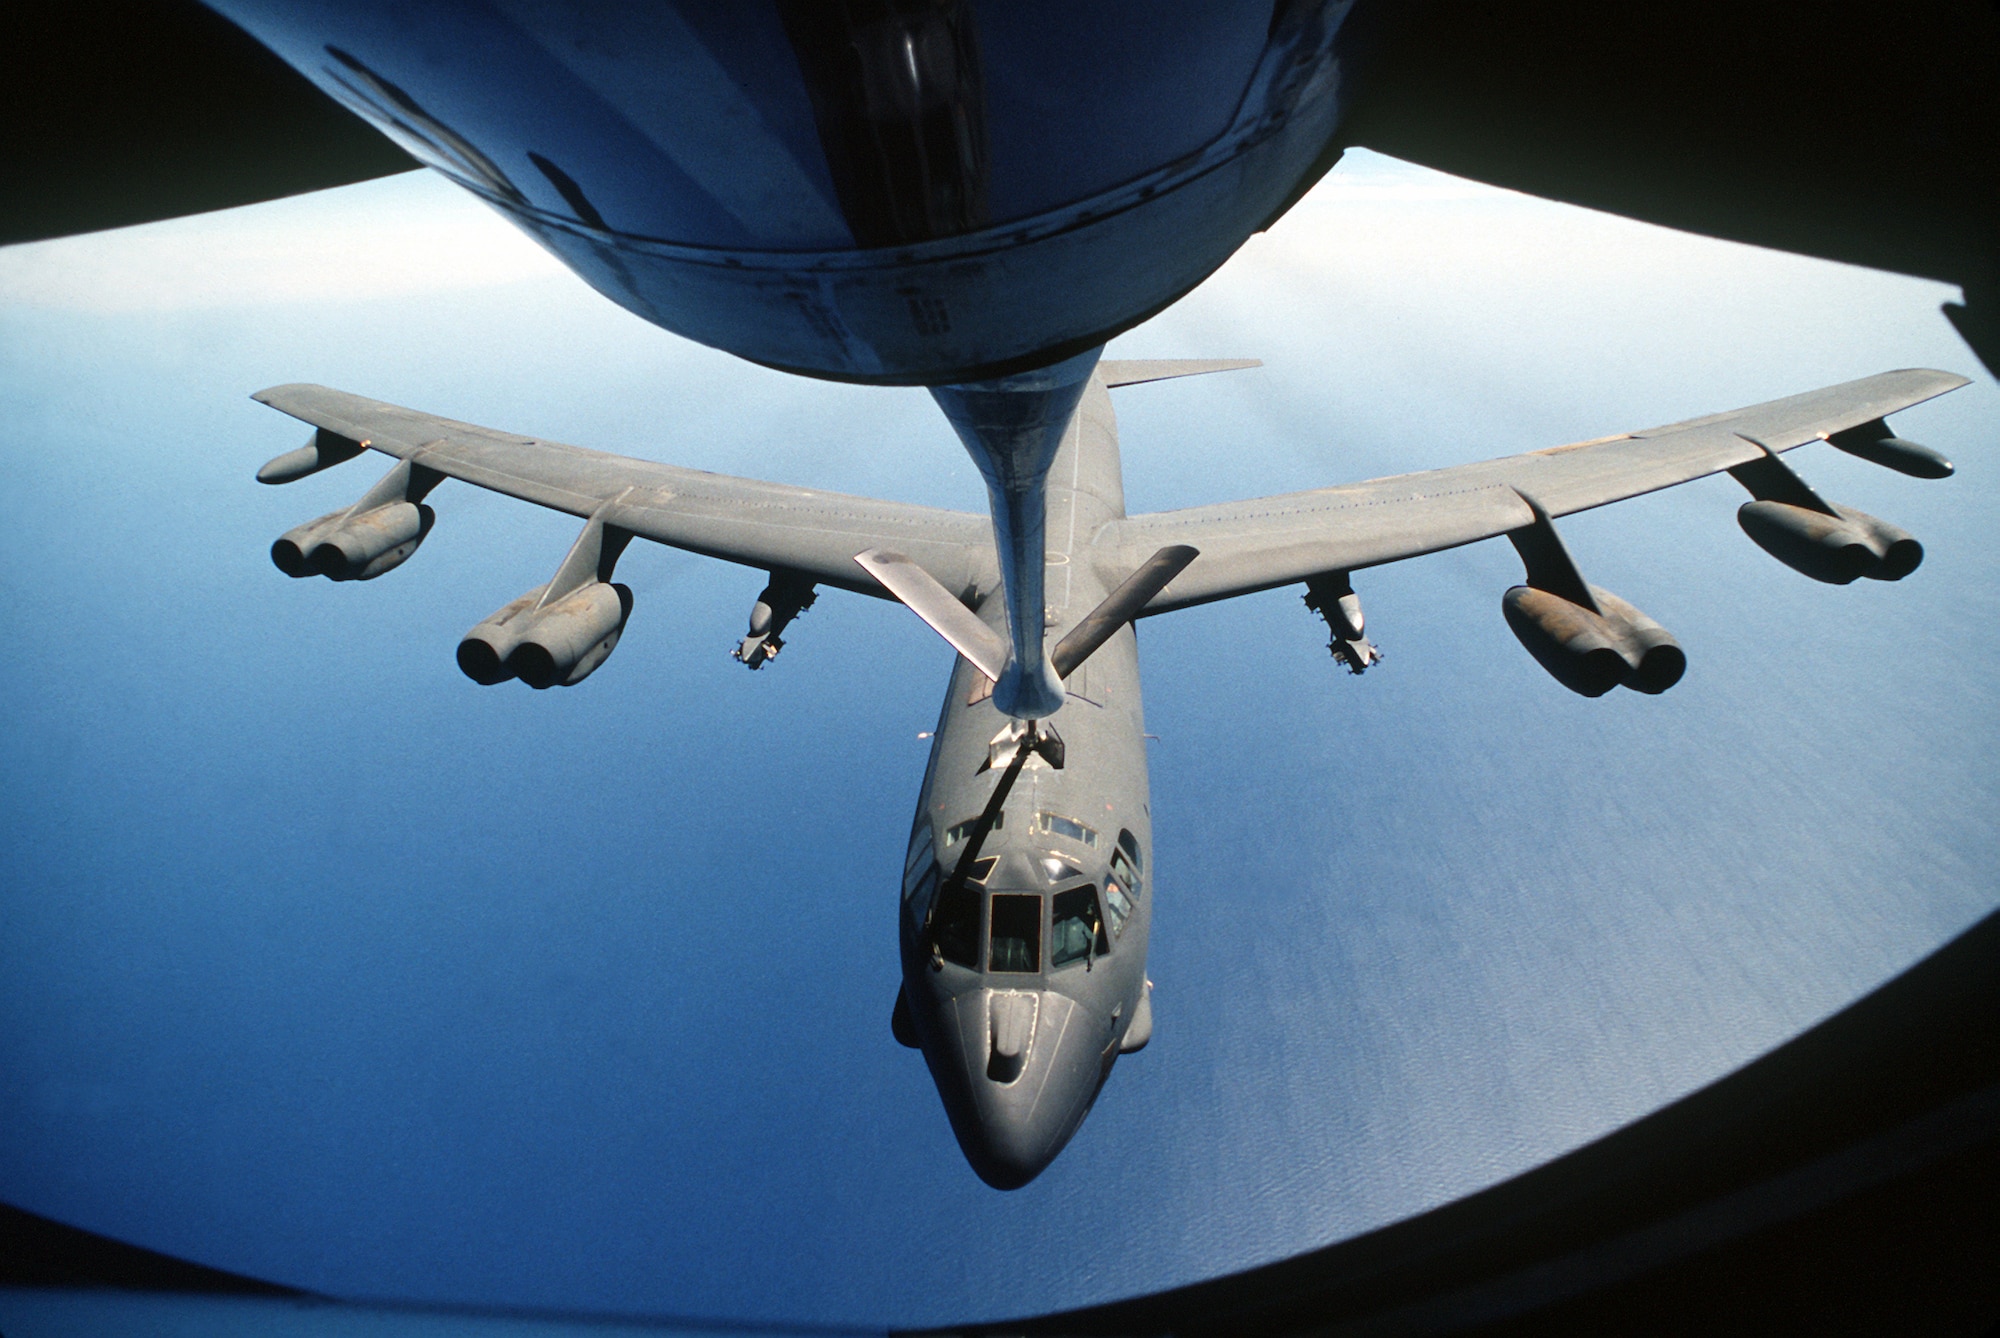 A boom operator for a KC-135 Stratotanker refuels a B-52 Stratofortress during air operations for Operation Desert Storm in February 1991. (Department of Defense Photo)

